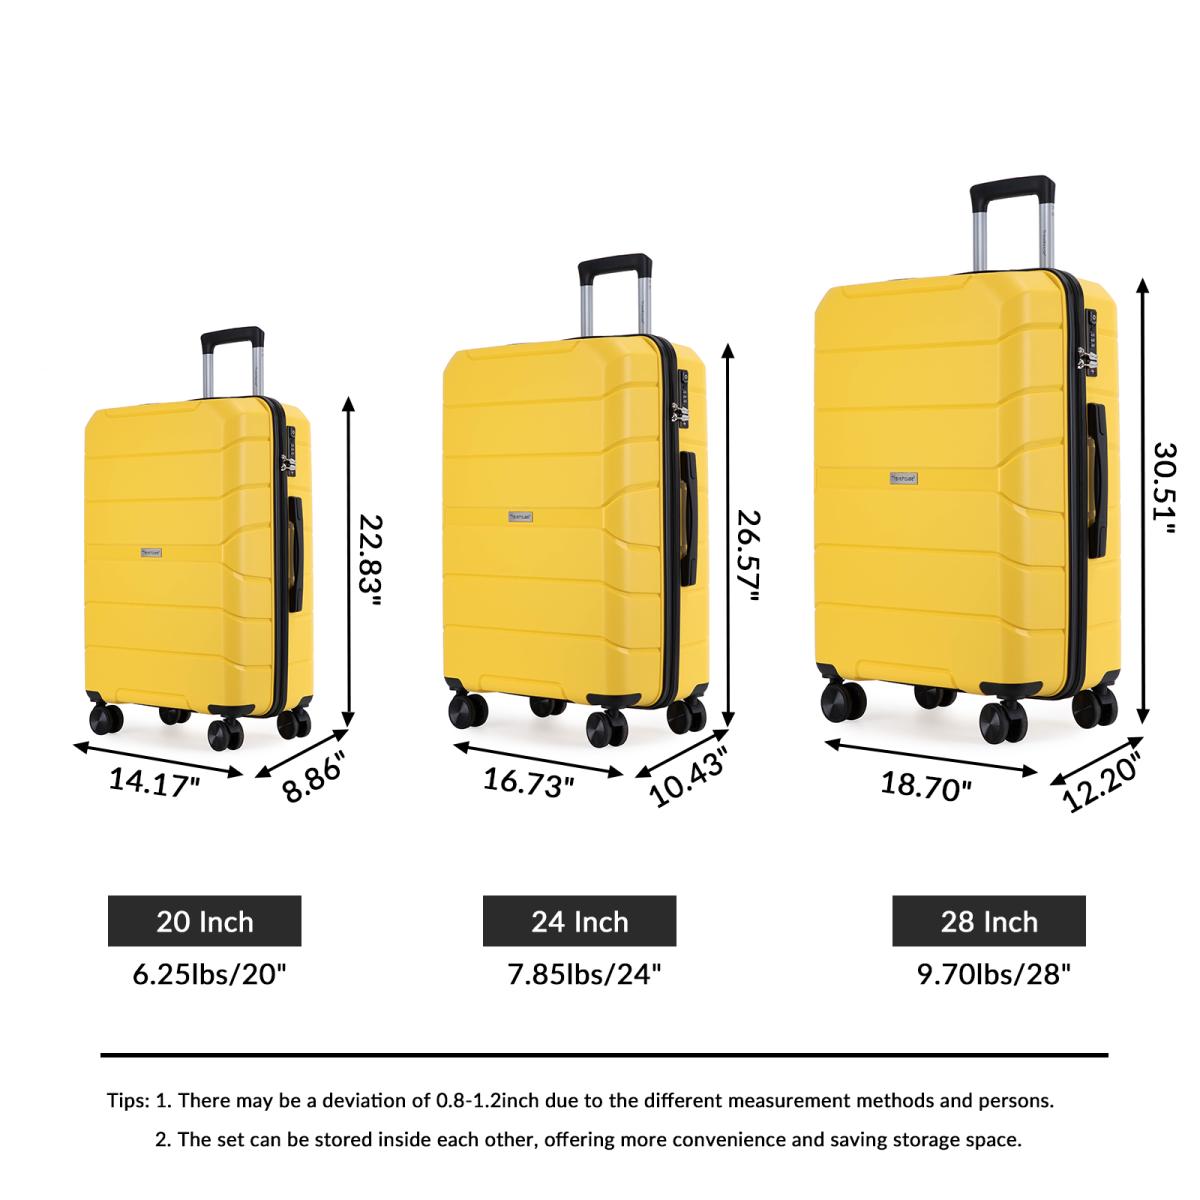 Hardshell Suitcase Spinner Wheels Pp Luggage Sets Lightweight Durable Suitcase with Tsa Lock,3-Piece Set (20/24/28) ,Yellow